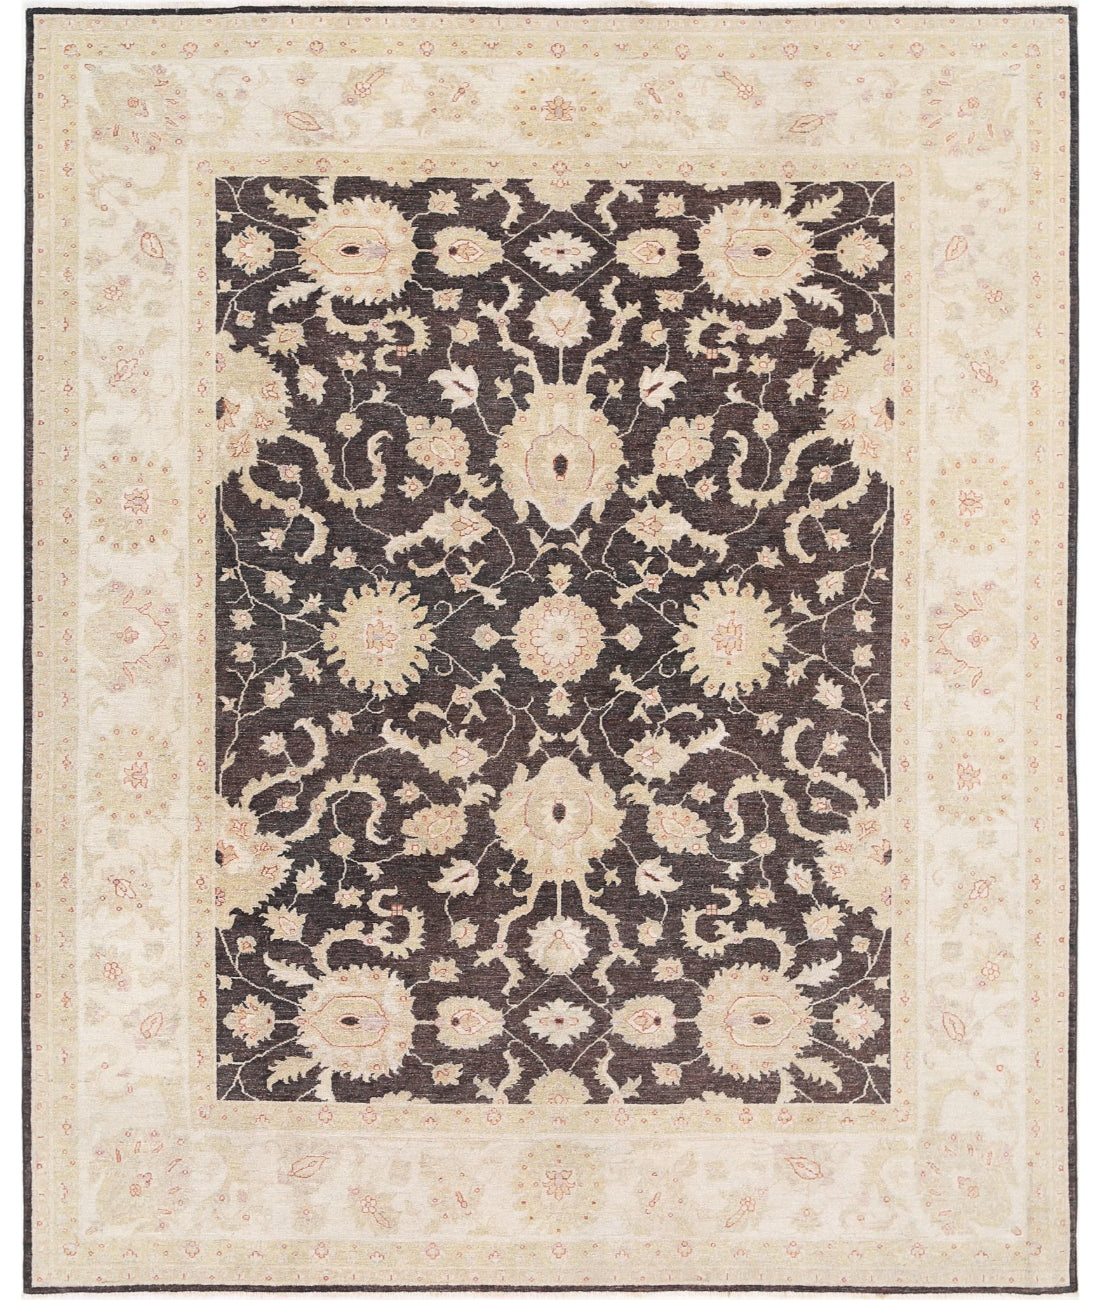 Hand Knotted Serenity Wool Rug - 7'11'' x 9'7'' 7'11'' x 9'7'' (238 X 288) / Black / Ivory